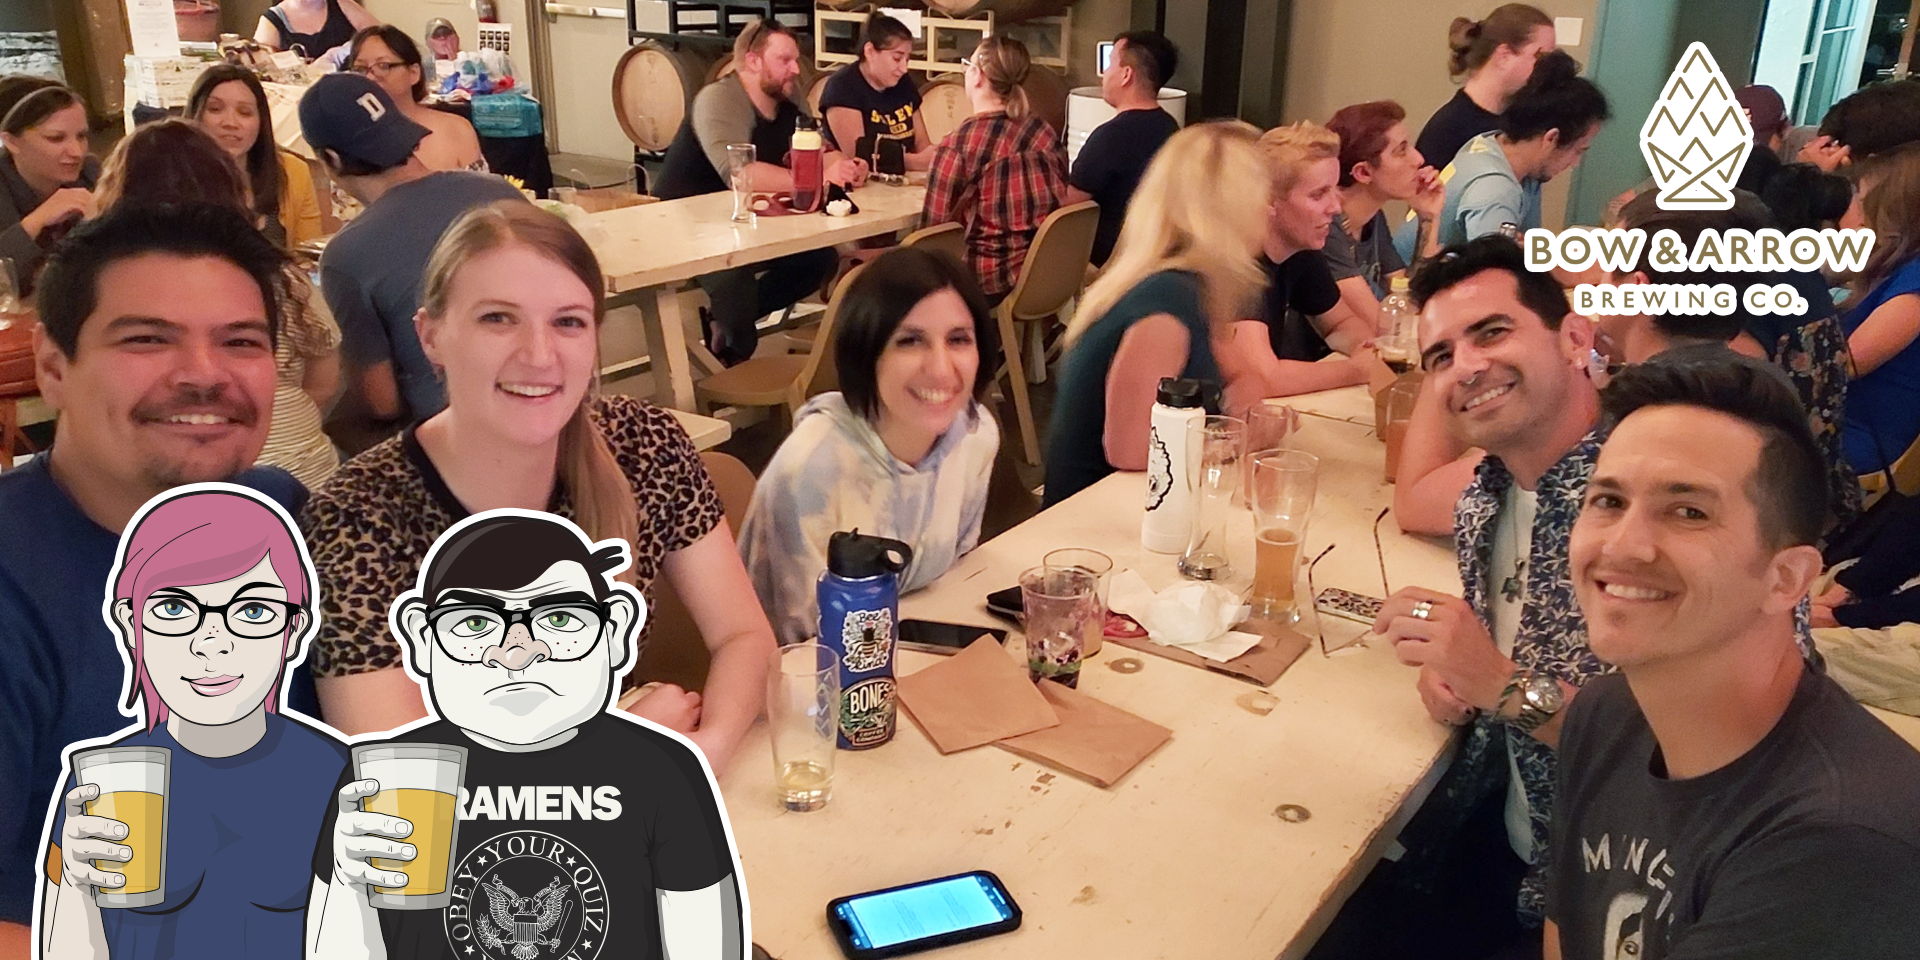 Geeks Who Drink Trivia Night at Bow & Arrow Brewing promotional image